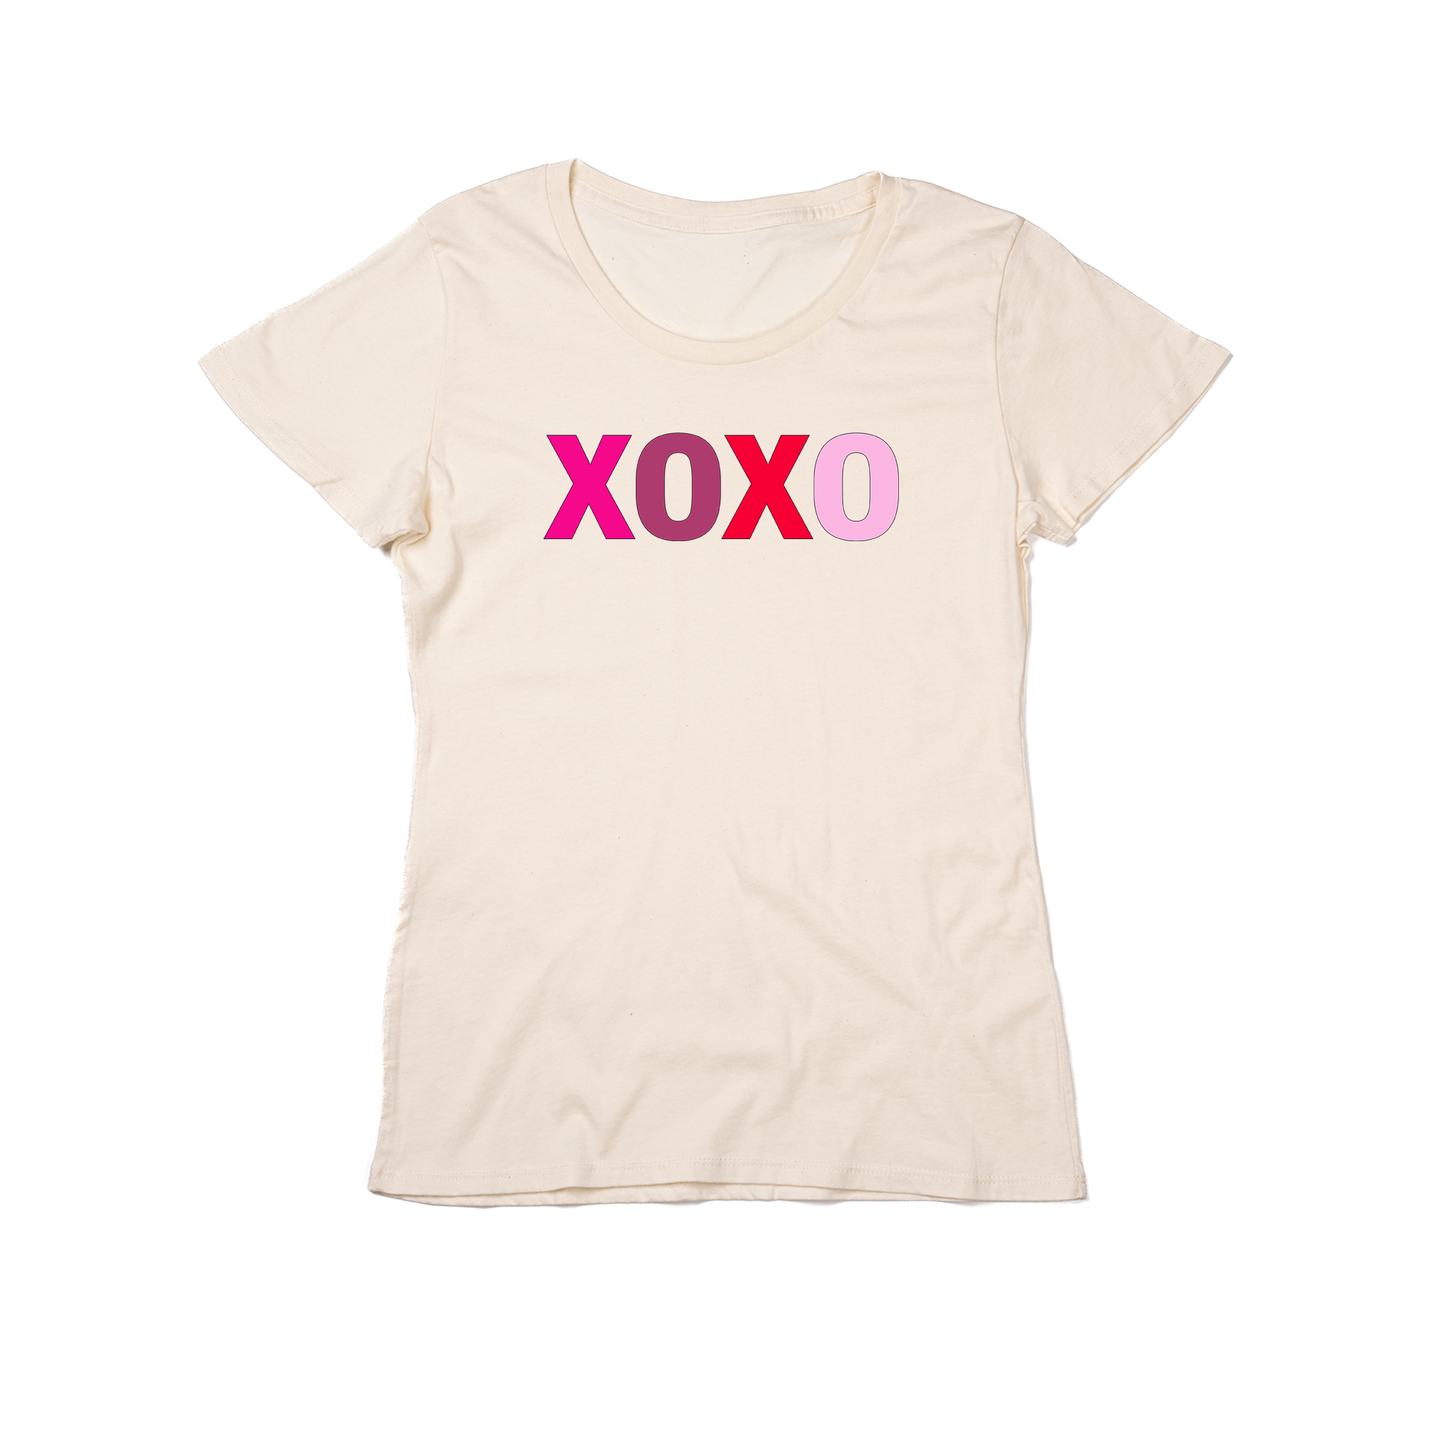 XOXO - Women's Fitted Tee (Natural)